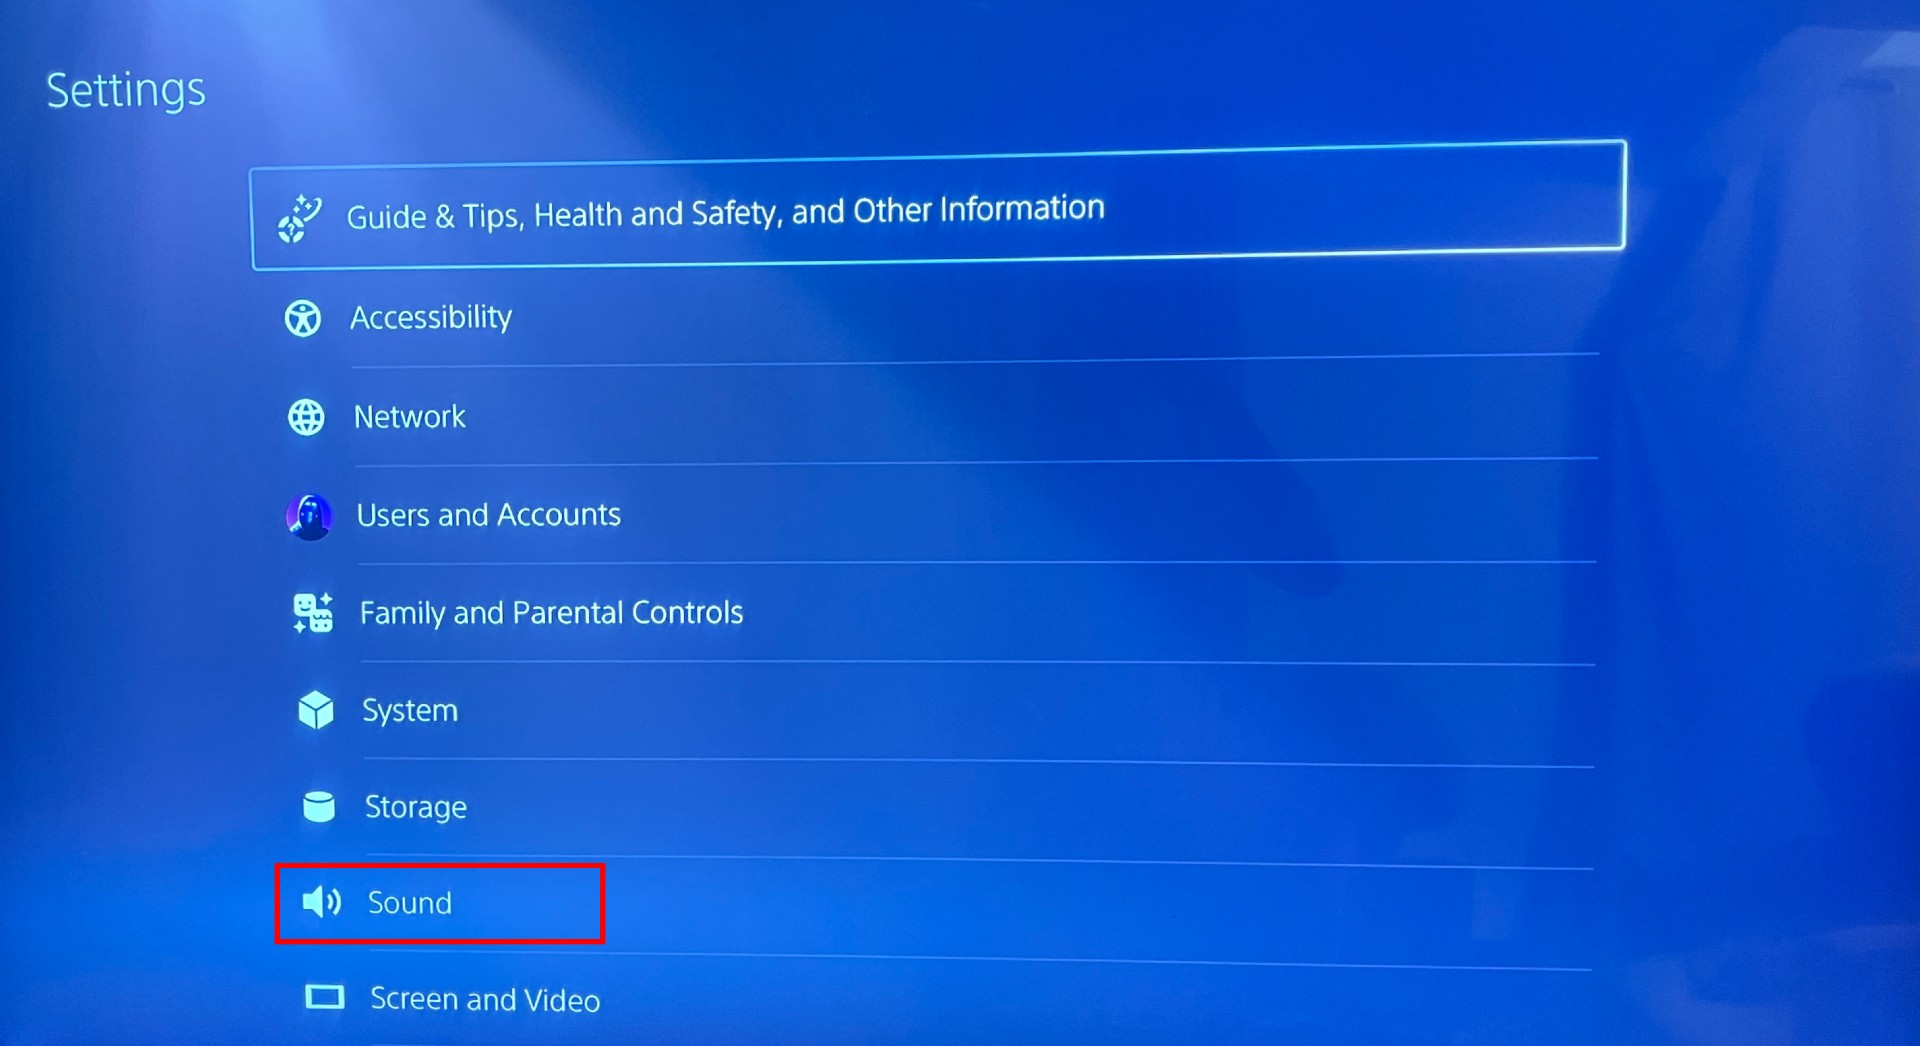 PS5 Settings page